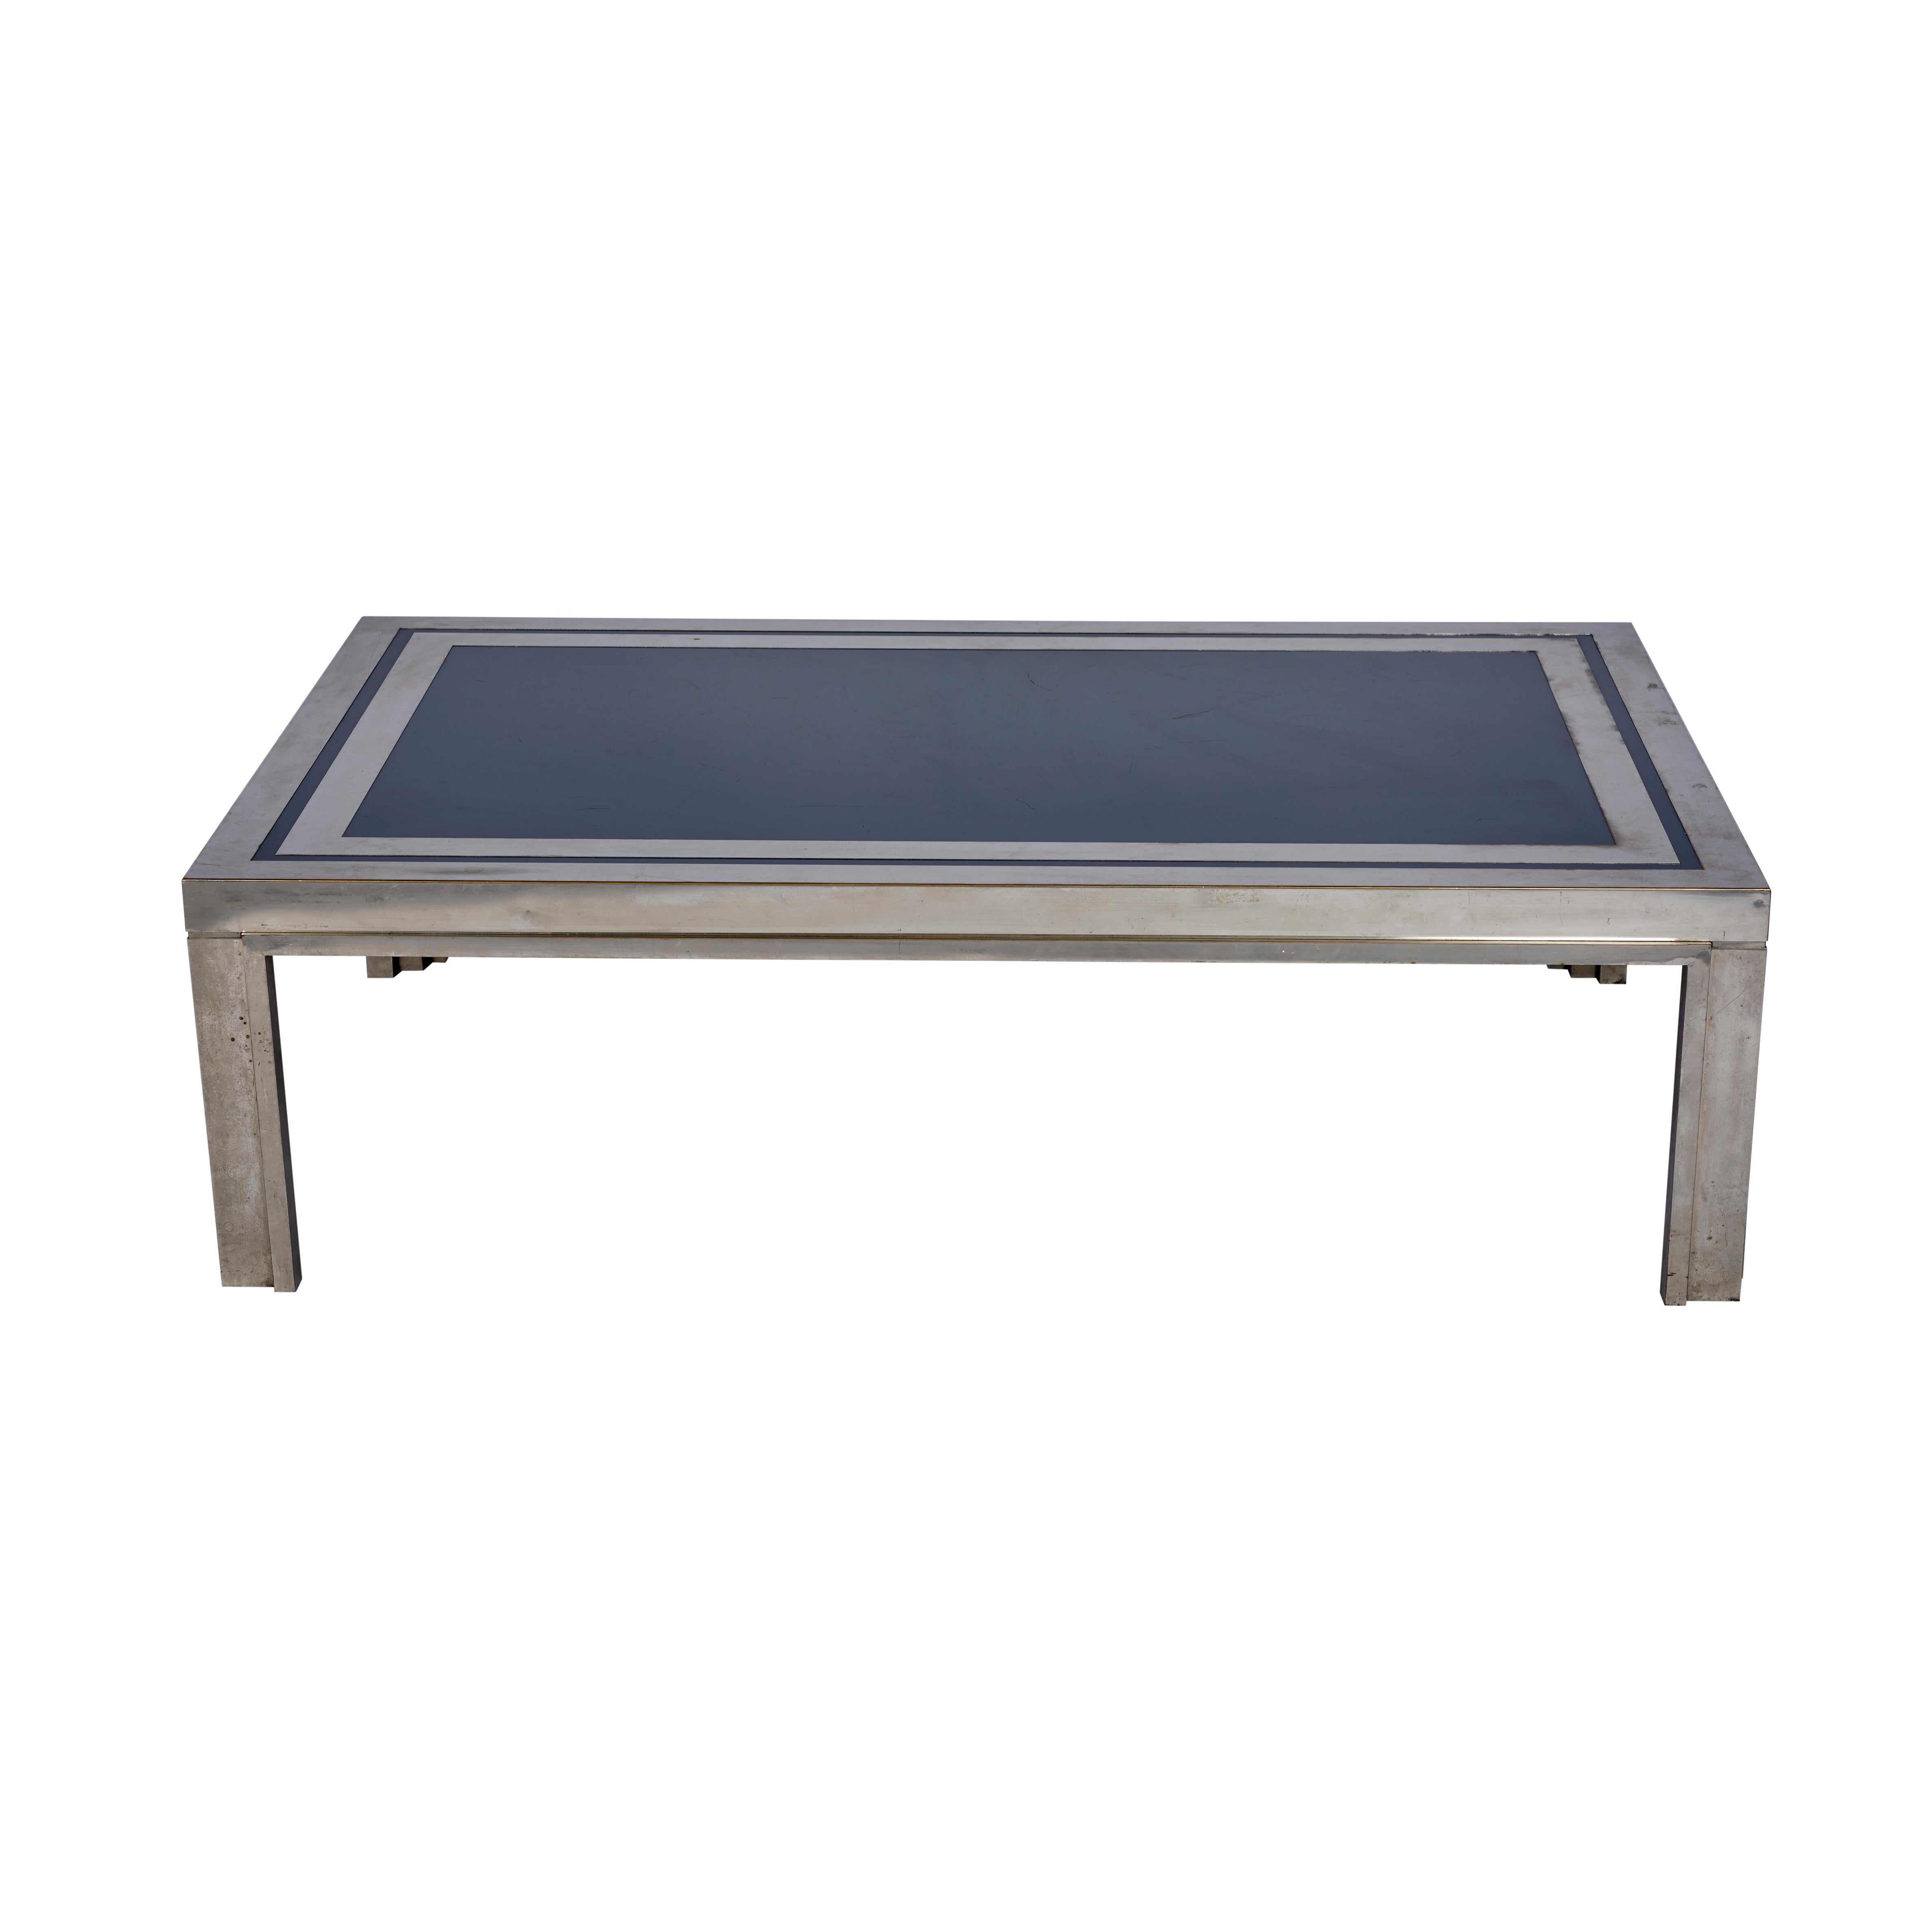 This Midcentury French steel with navy enamel top coffee table is chic and substantial.

Since Schumacher was founded in 1889, our family-owned company has been synonymous with style, taste, and innovation. A passion for luxury and an unwavering